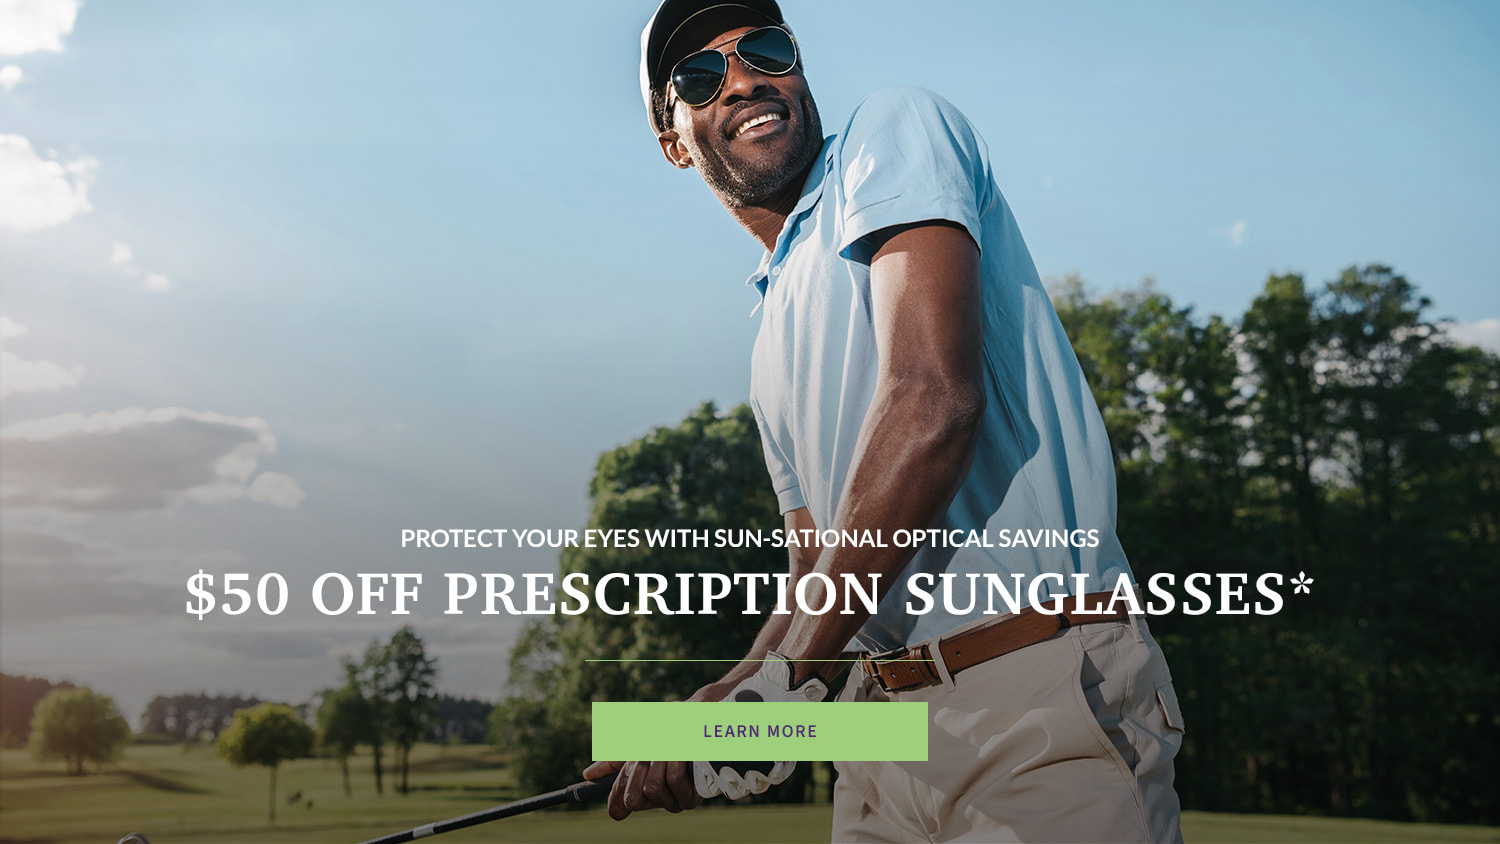 PROTECT YOUR EYES WITH SUN-SATIONAL OPTICAL SAVINGS $50 OFF PRESCRIPTION SUNGLASSES